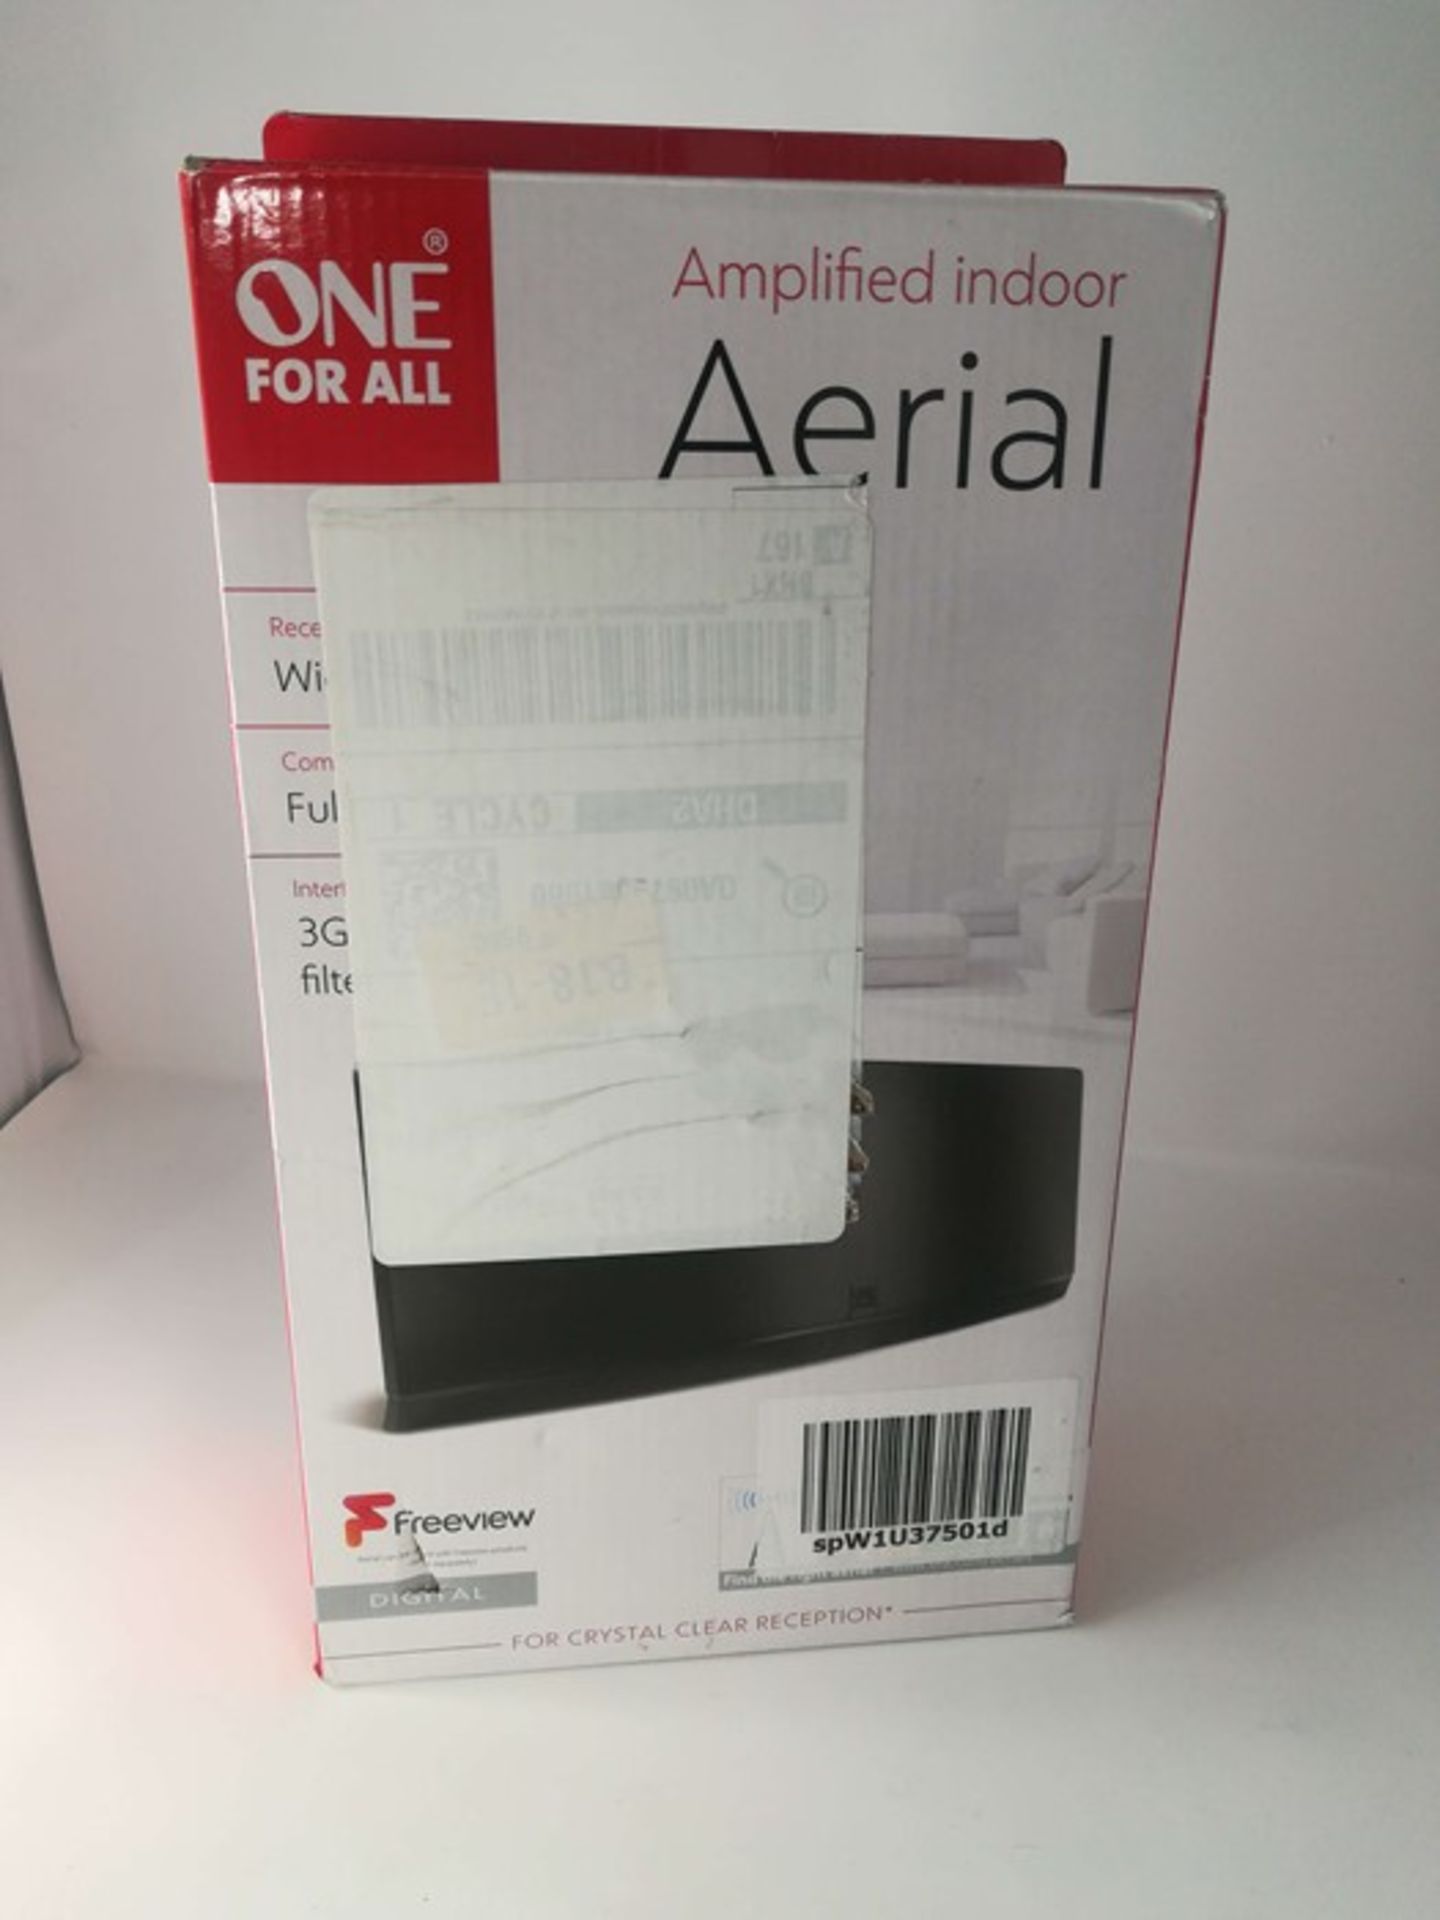 One For All Amplified Indoor Digital TV Aerial, Curved HDTV Antenna â¬  UHF/VHF - - Image 2 of 2